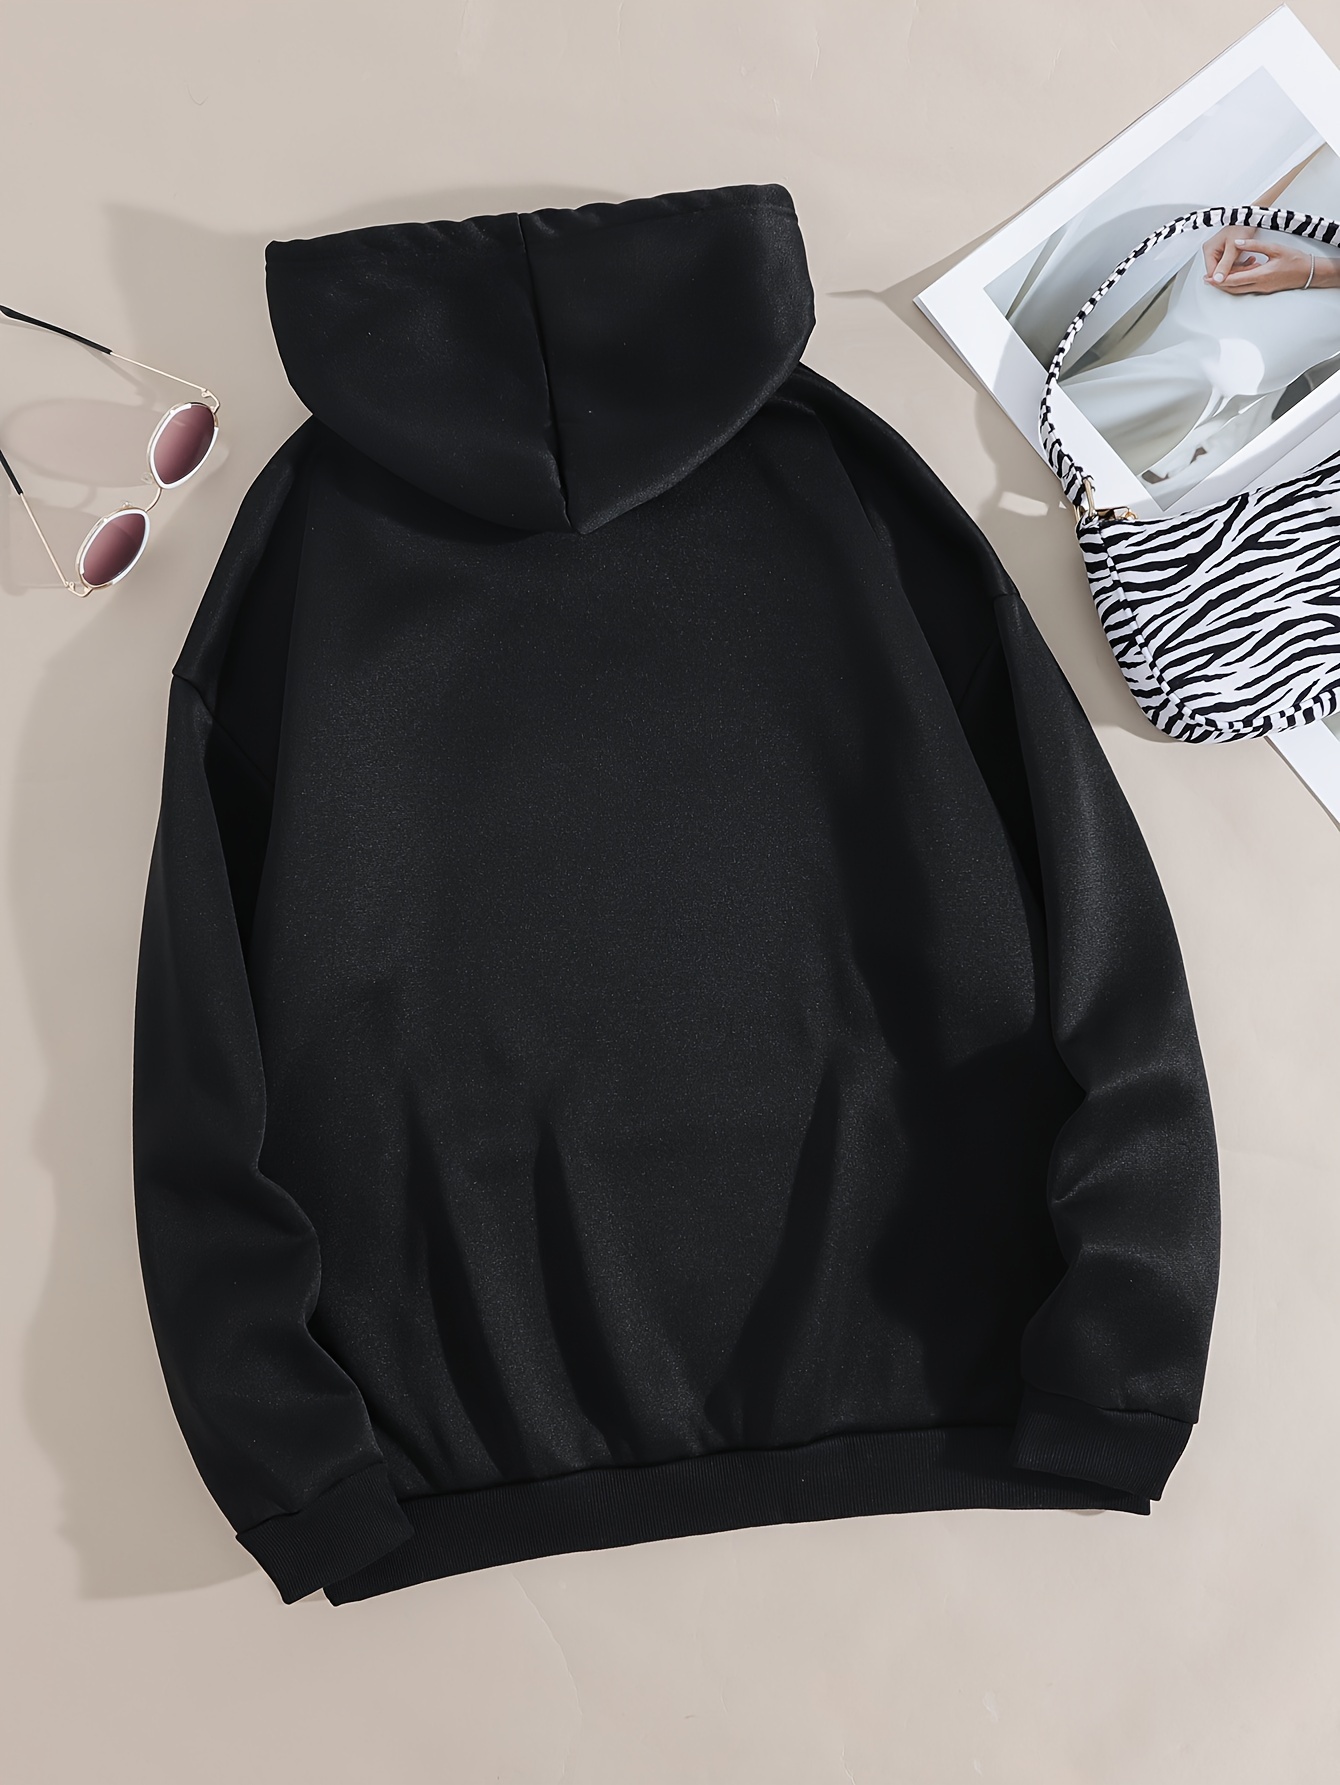 white thermal hoodies long sleeve casual sweatshirt for fall winter womens clothing details 15